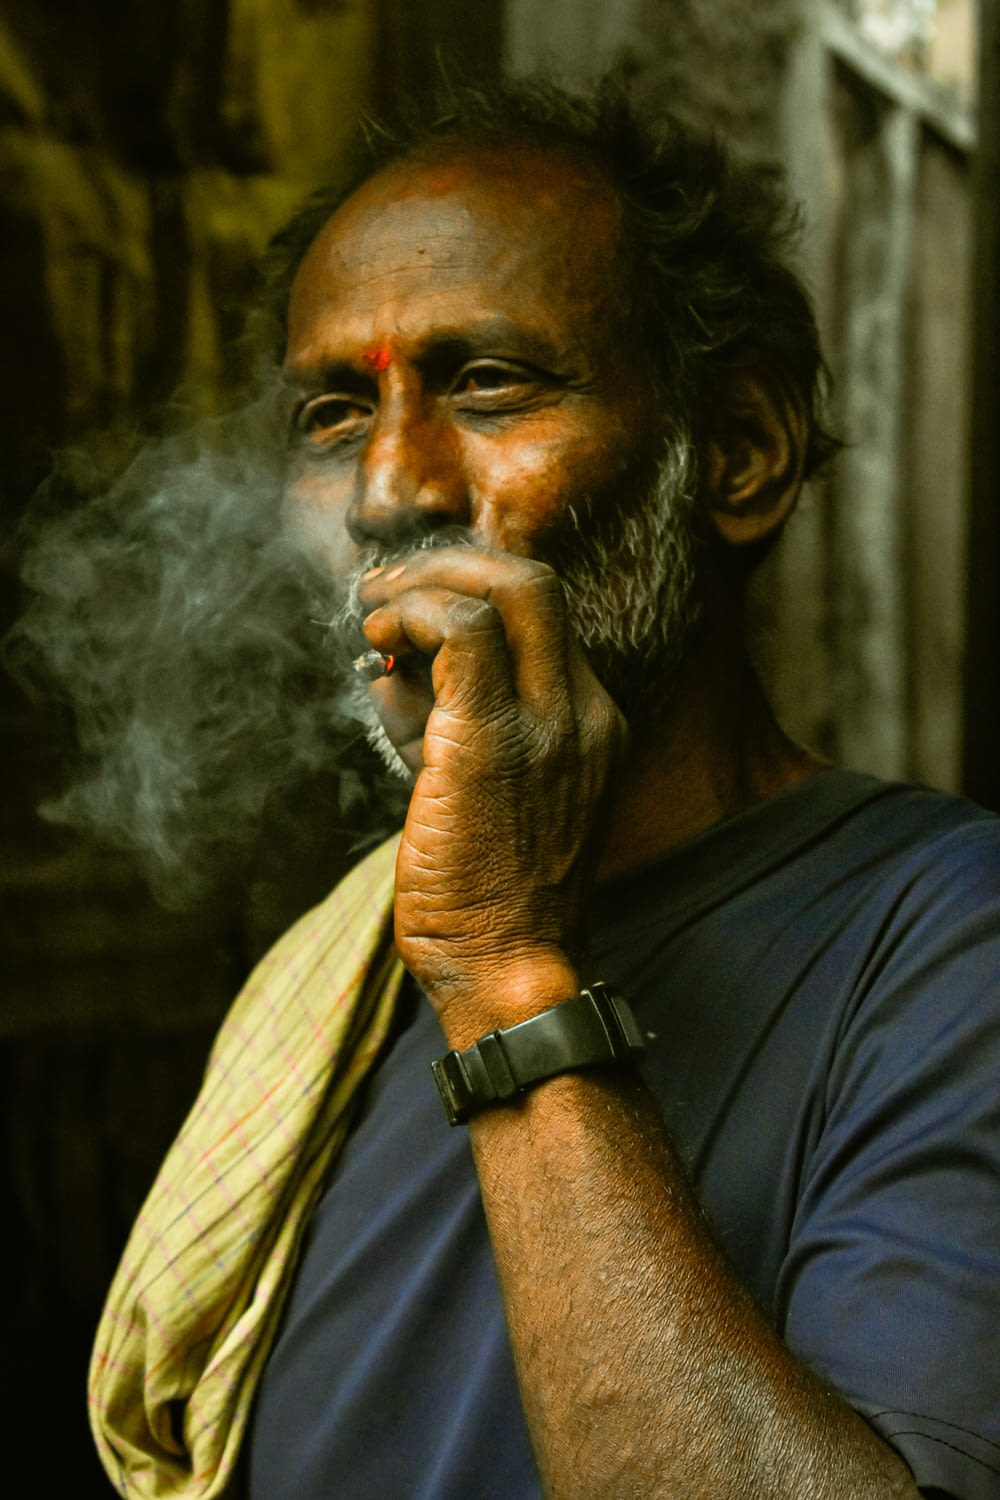 a man with a watch on his wrist smoking a cigarette